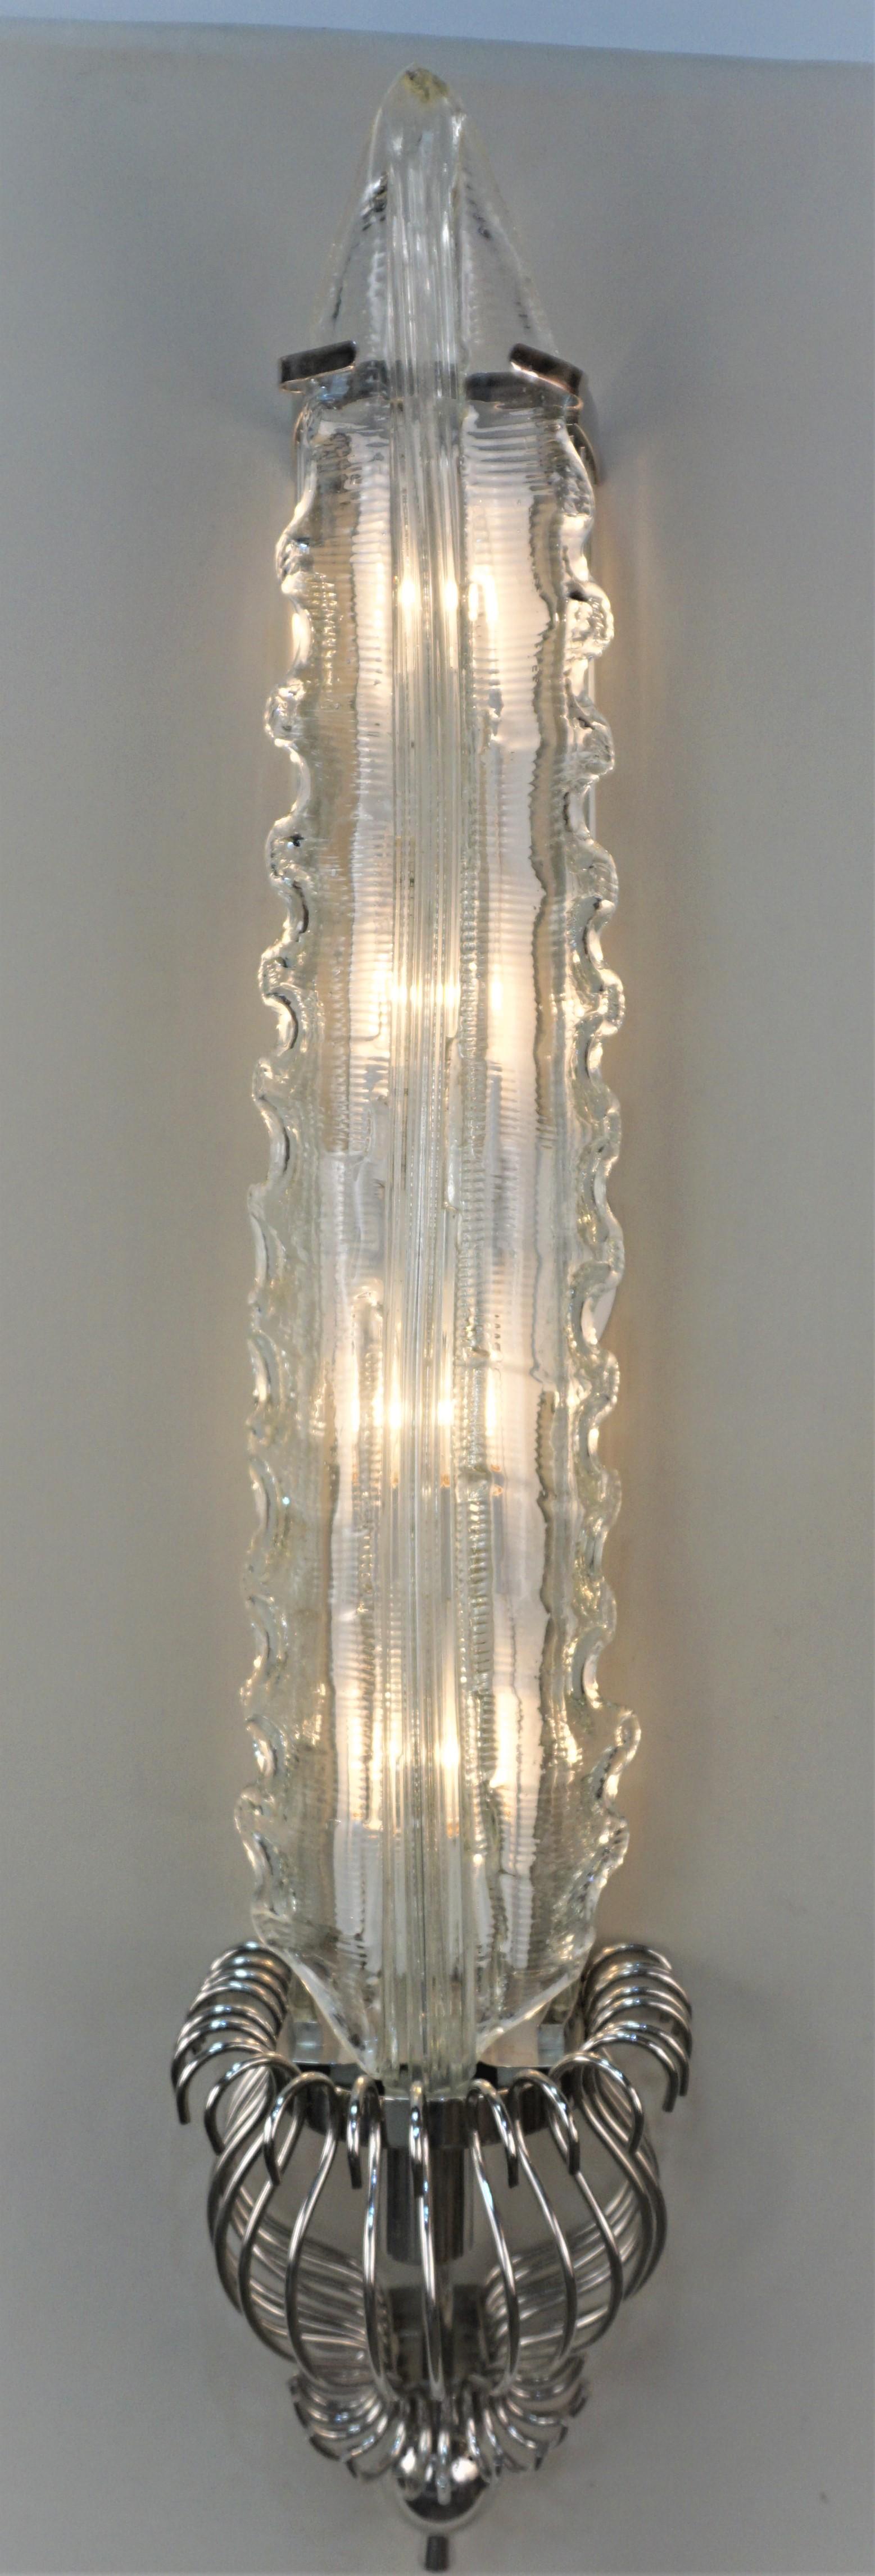 Pair of large center leaf blown glass, glass rods on the sides with nickel on bronze hardware wall sconces.